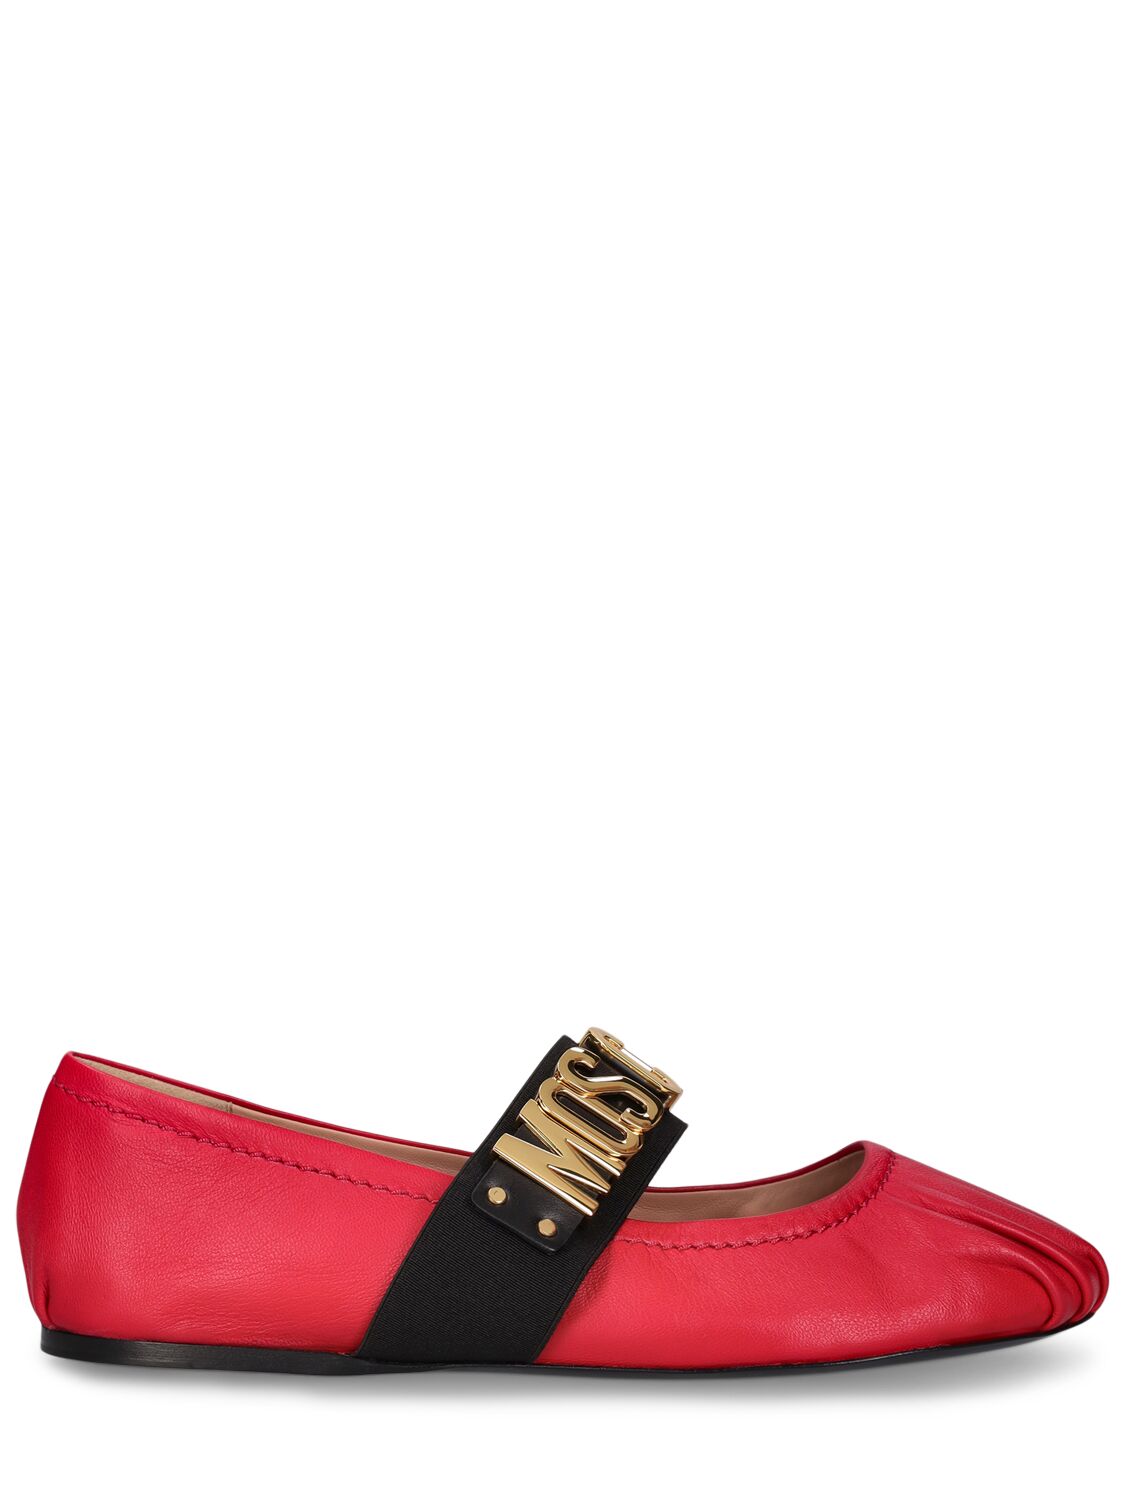 Moschino 10mm Leather Ballerina Flats In Red